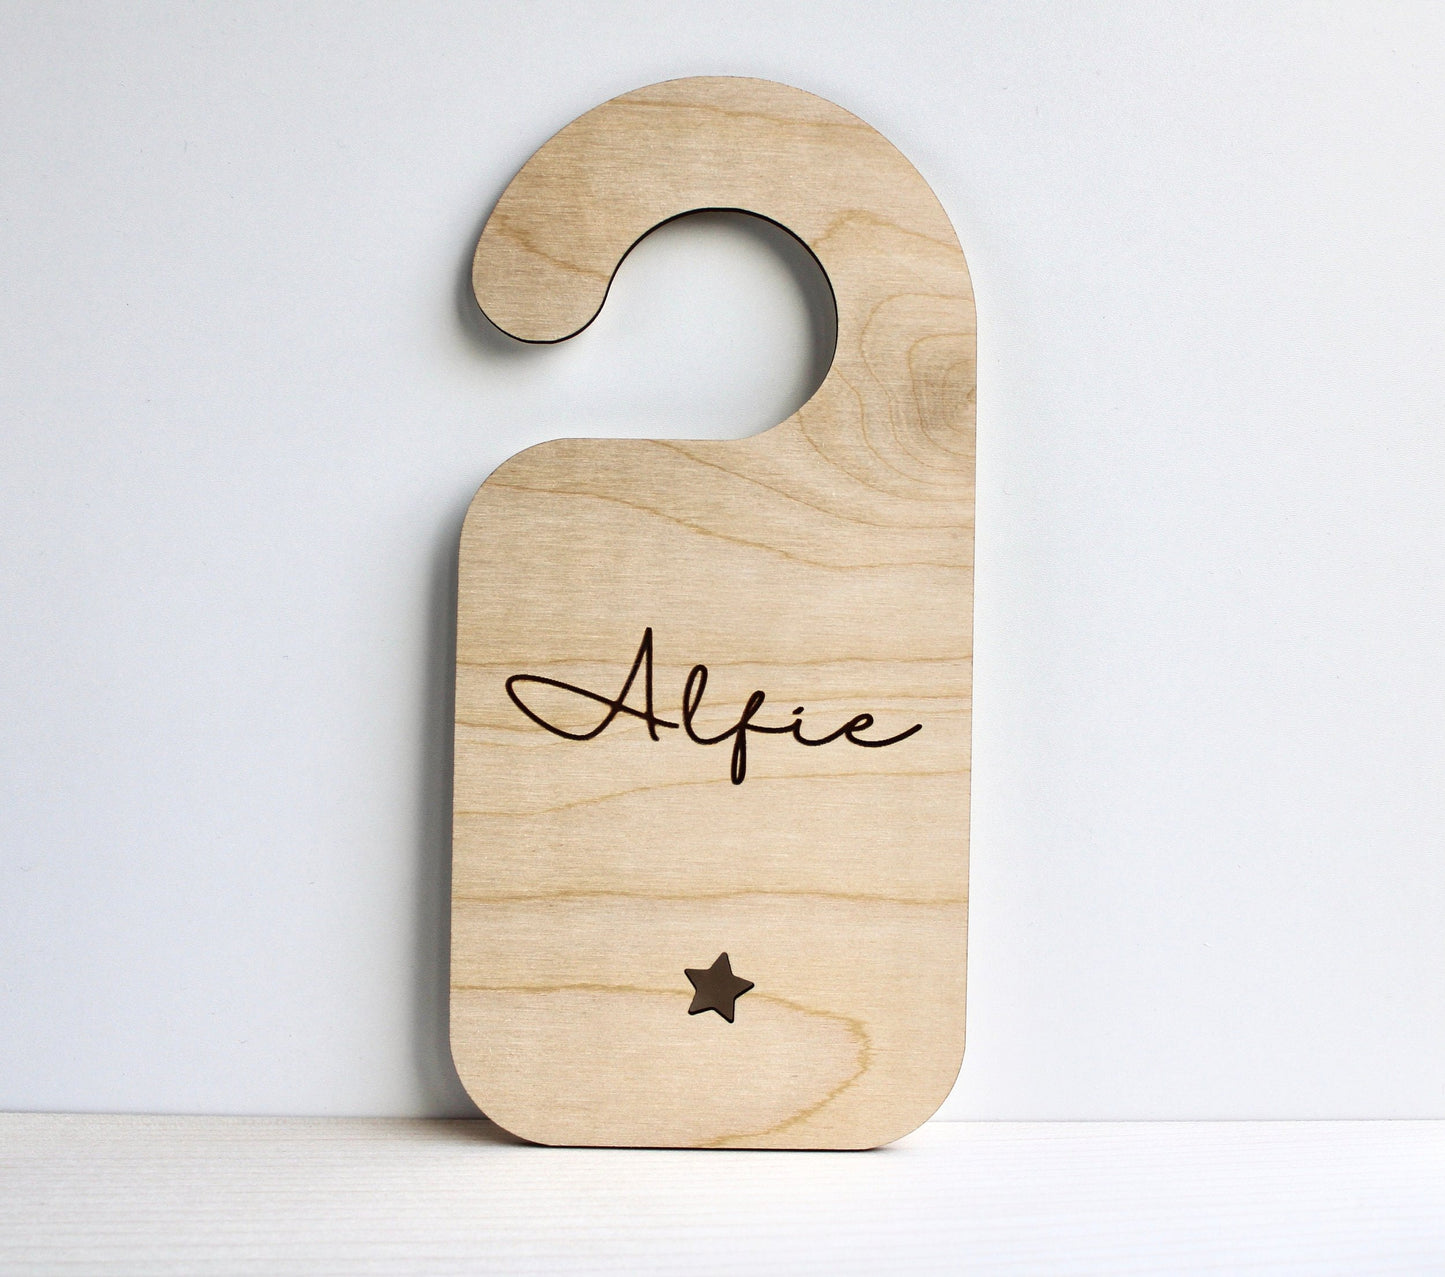 Wooden baby name door hanger with star/heart cut-out